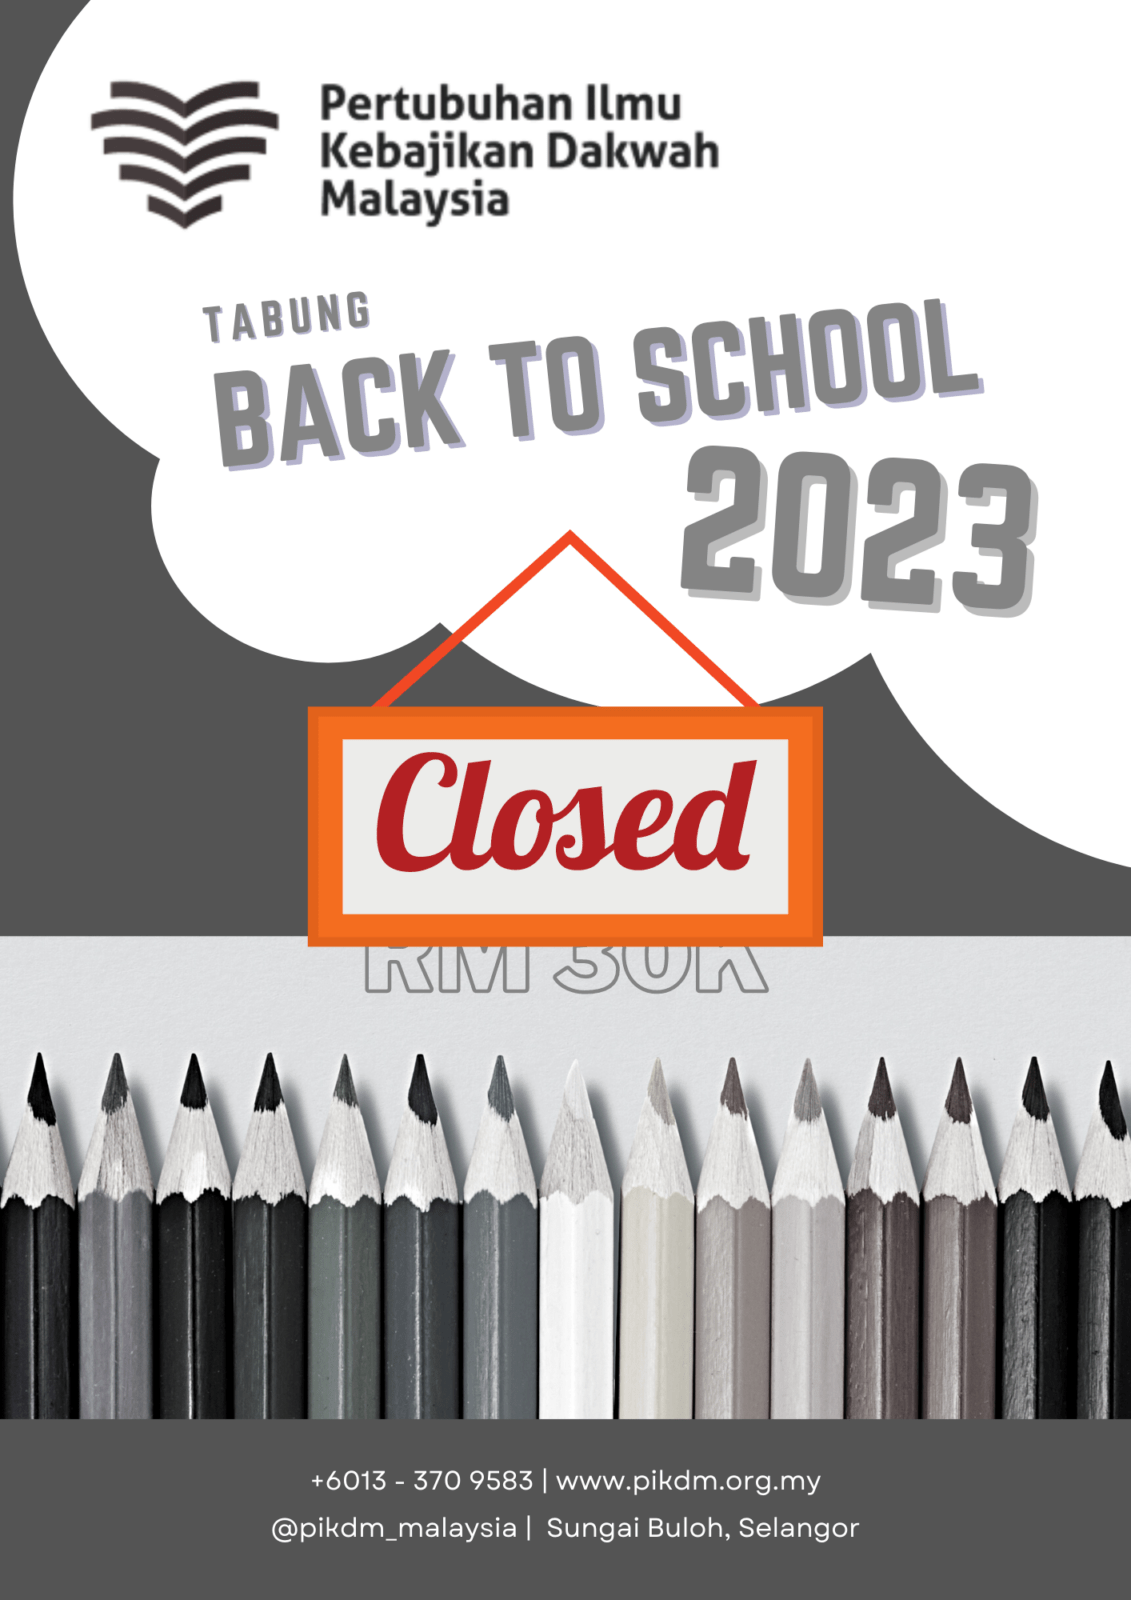 Tabung-Back-To-School-2023-Closed